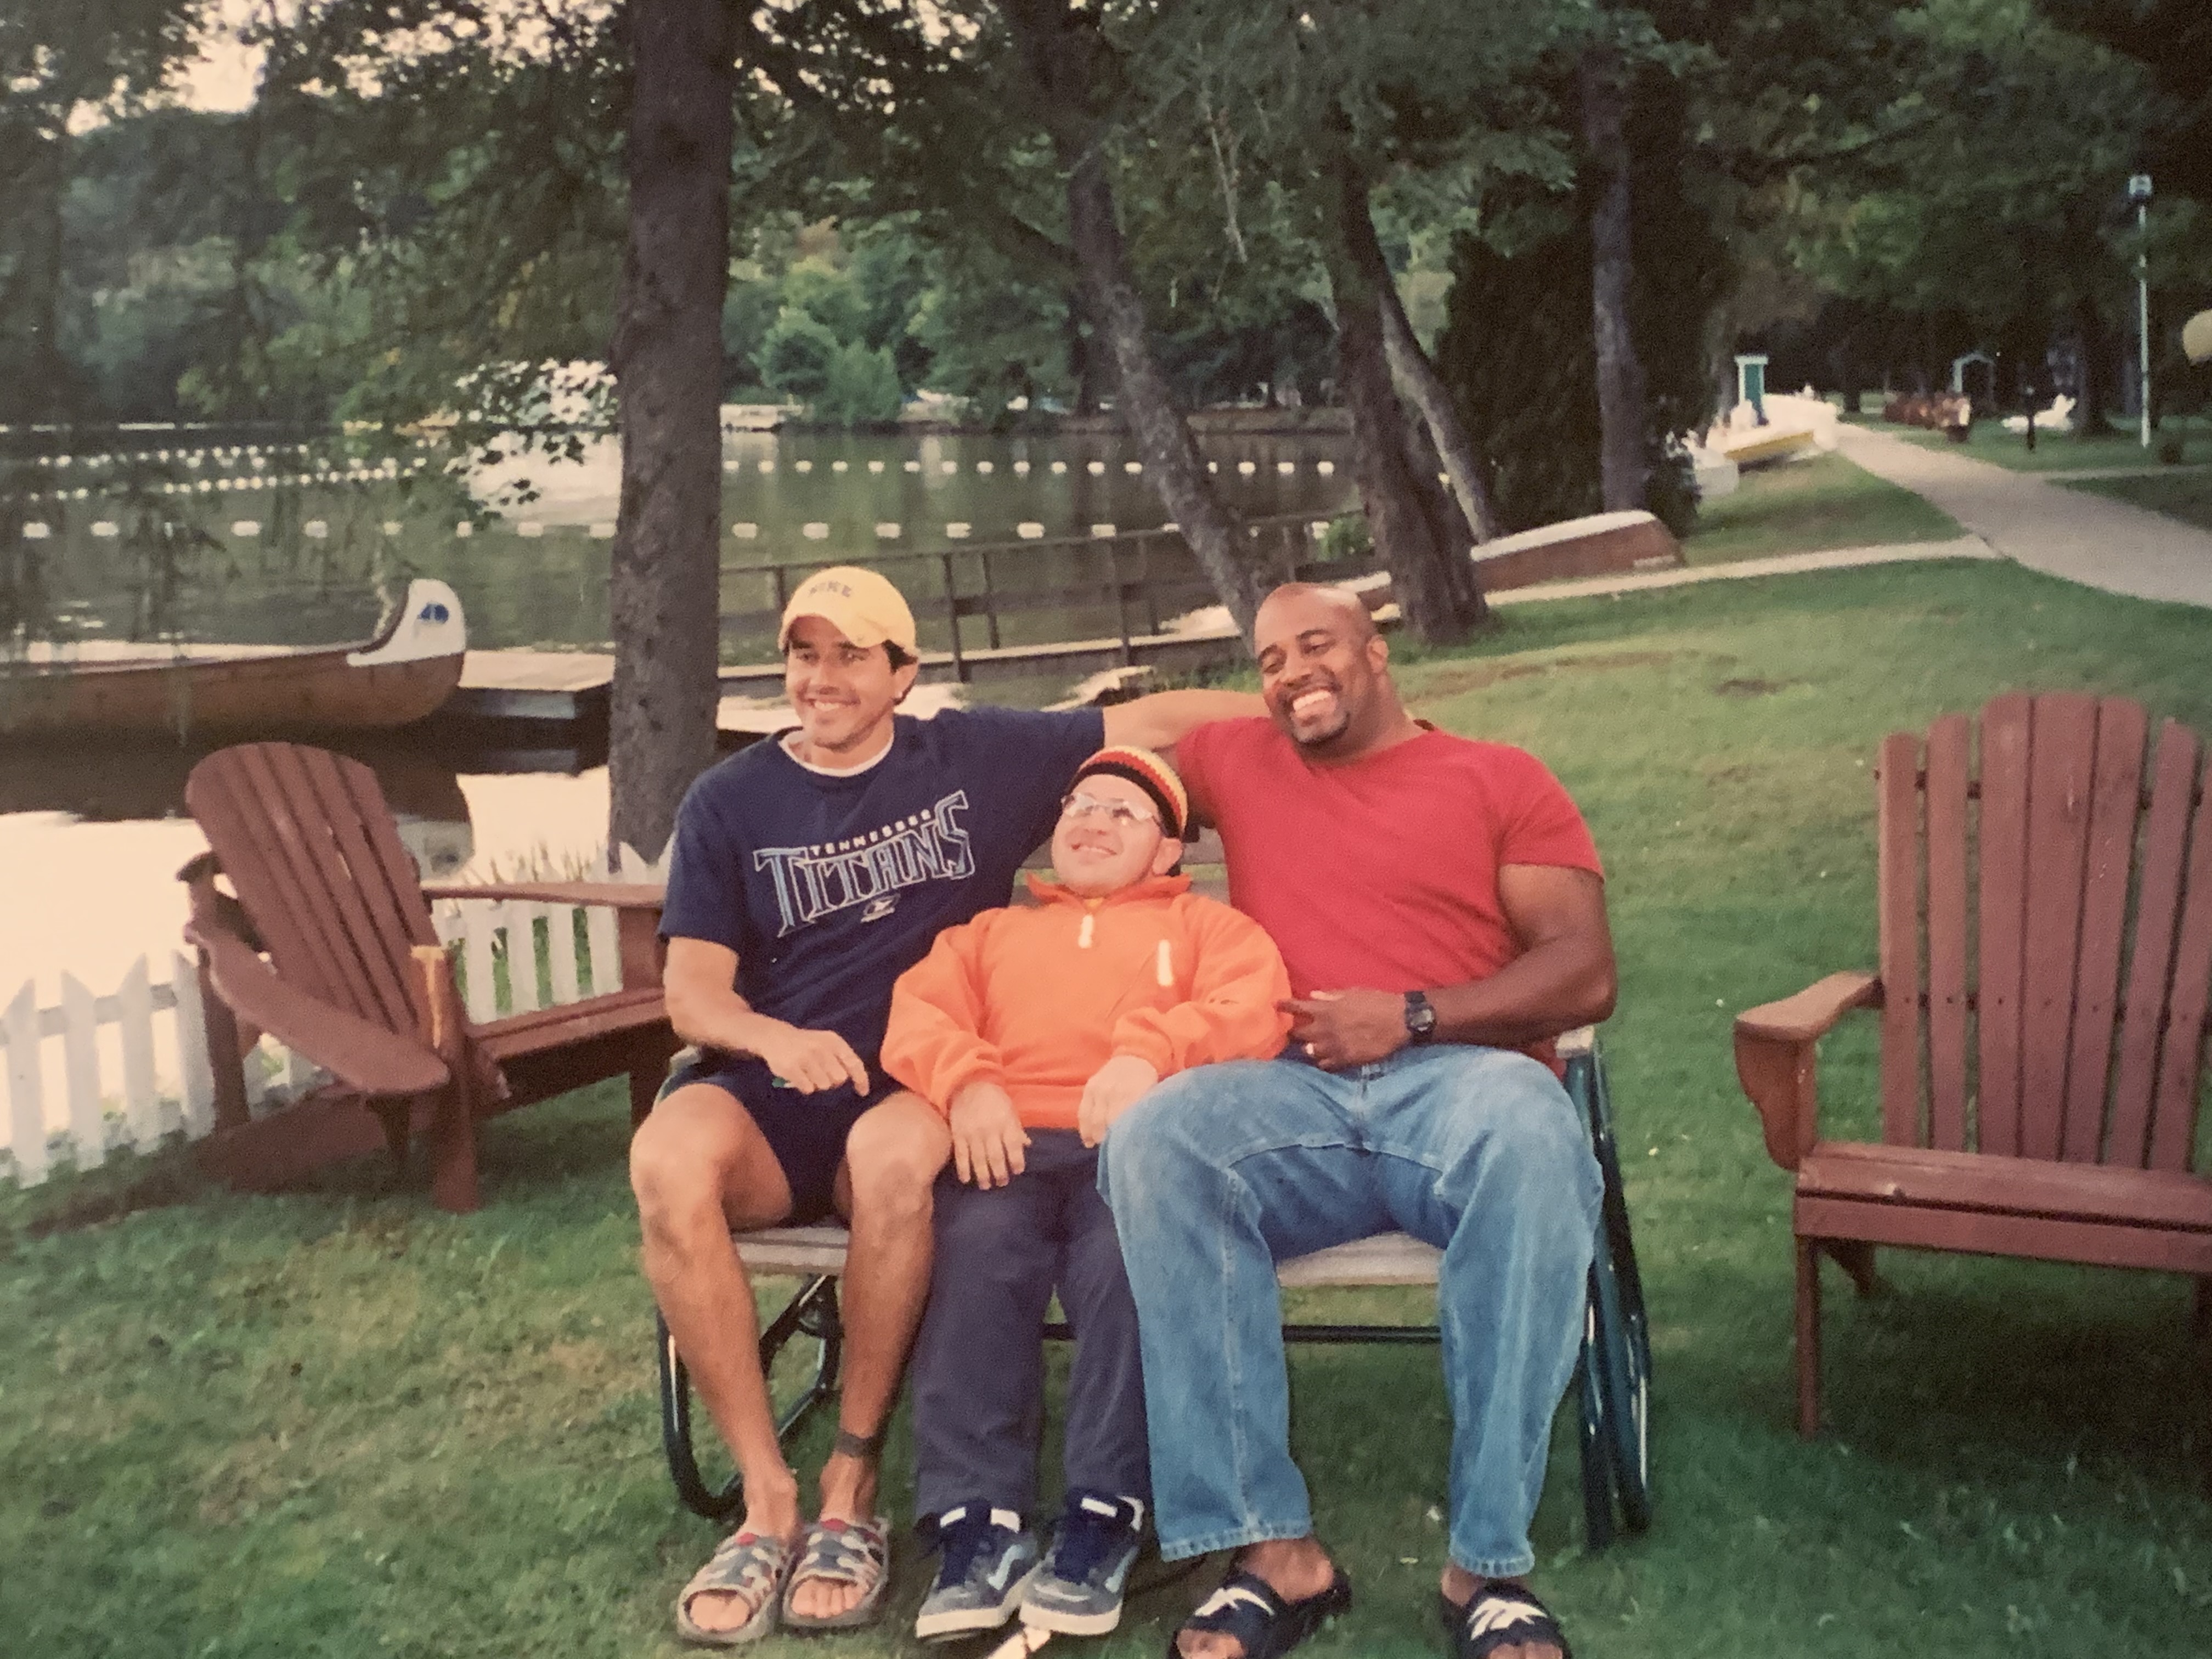 Shawn Dale, Bill Vastis and Derek Thompson sit together on a bench and pose for a group photo on the shoreline of Lake Joe. Their smiles are wide and radiate joy! 